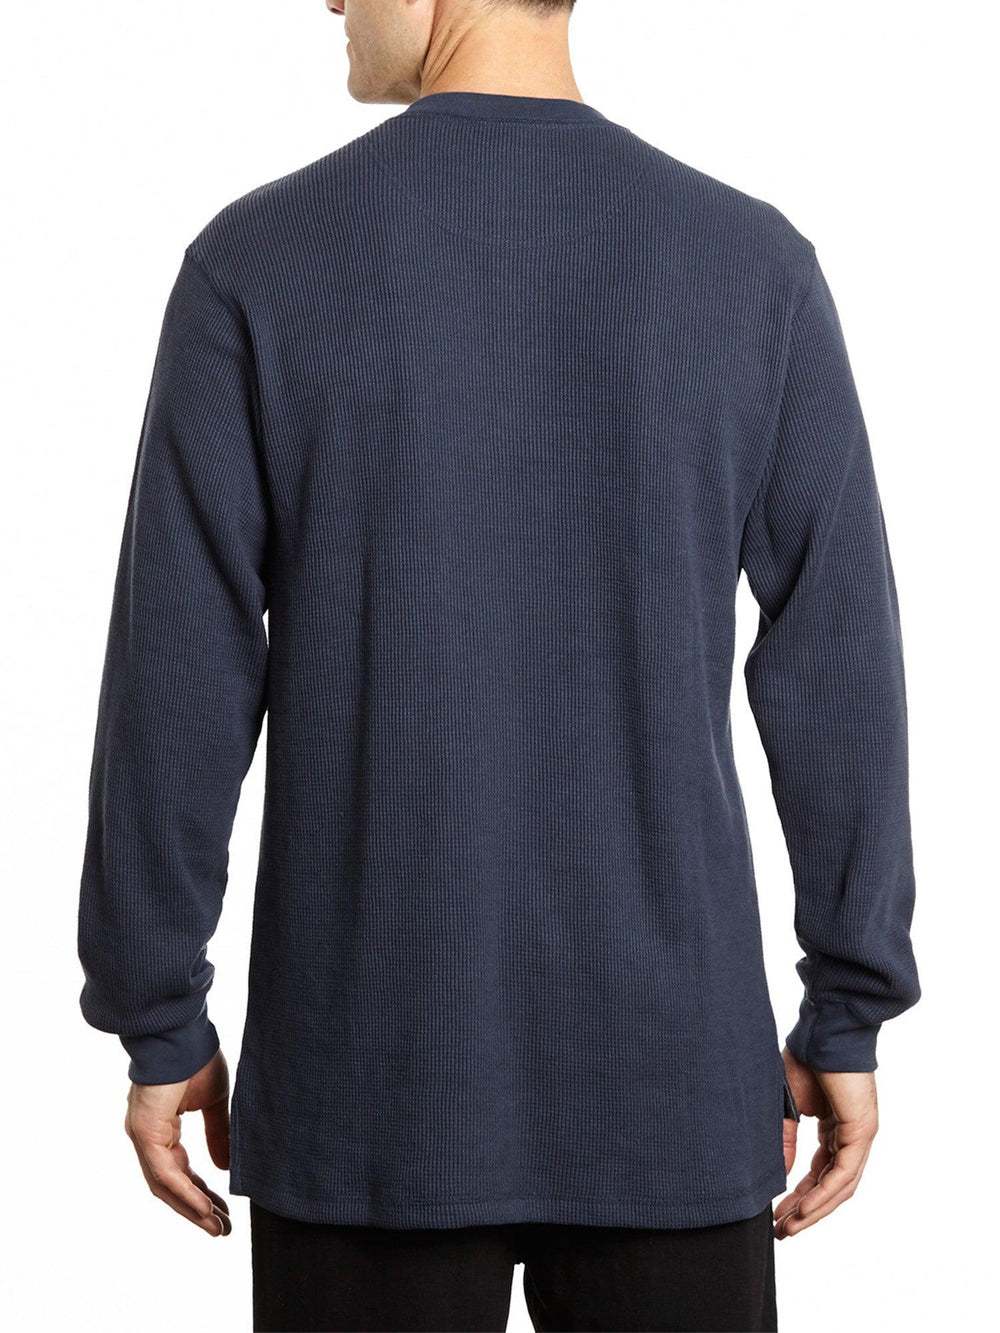 Thermal Henley Shirt with Long Sleeves